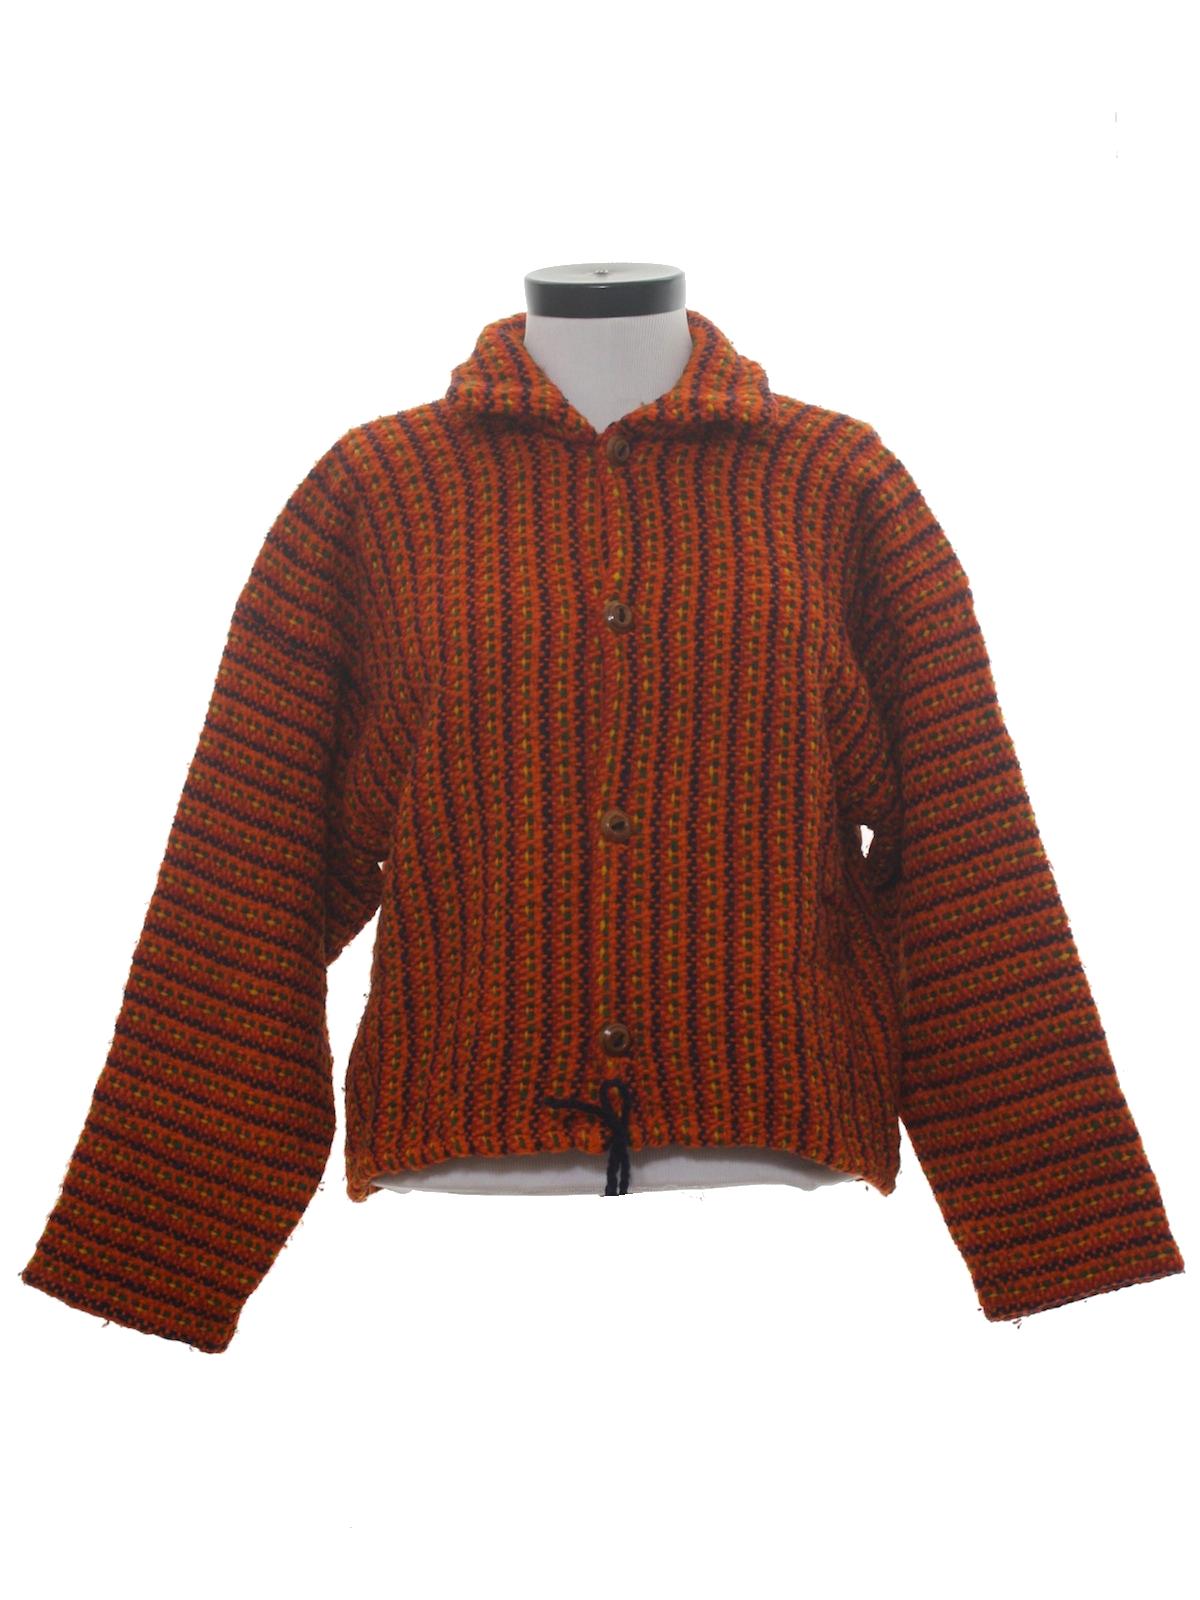 1980's Retro Sweater: 80s -Missing Label- Womens orange background with ...